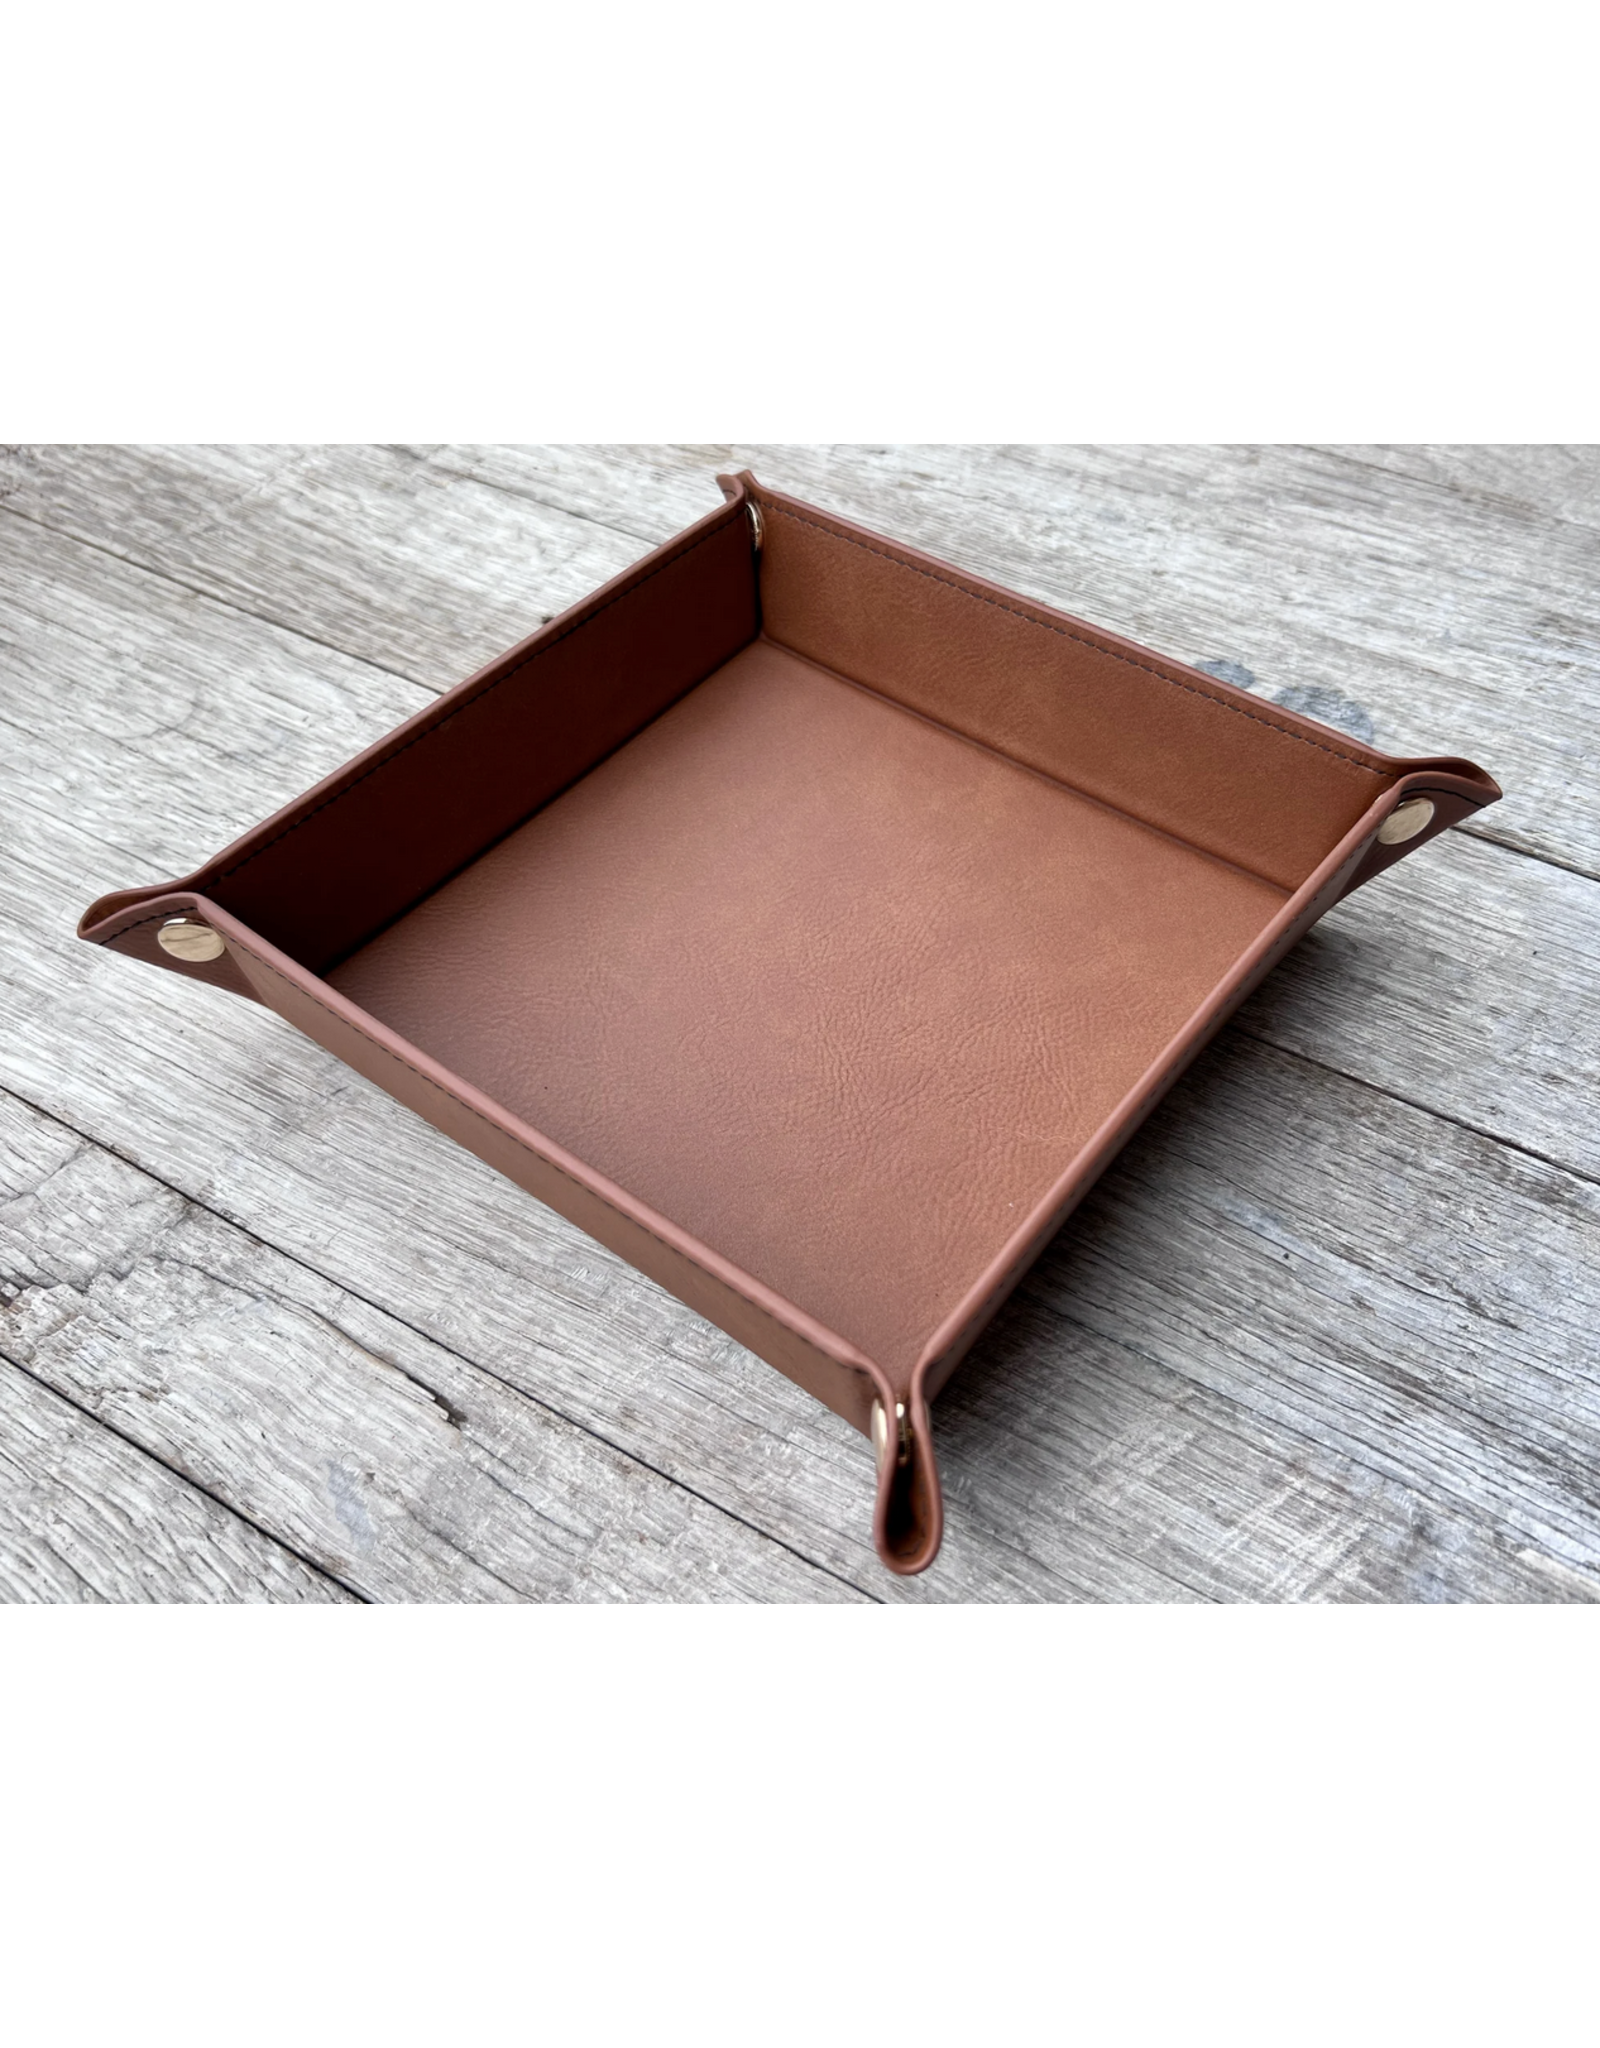 KW Custom Creations 2 Leather Valet Tray (includes engraving)